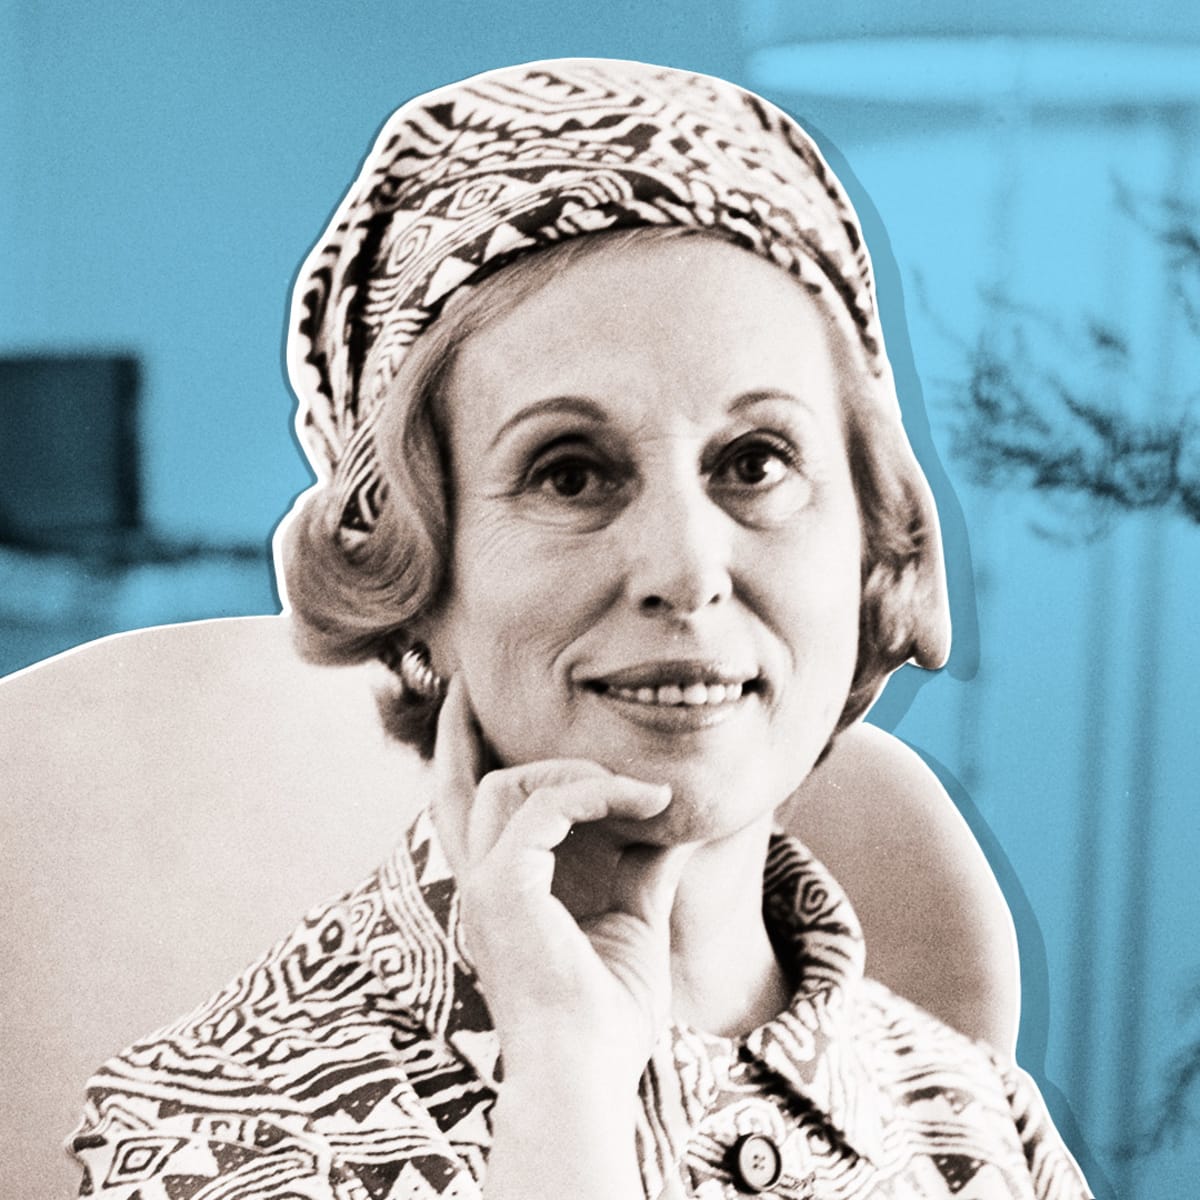 How Estée Lauder Changed the Face of the Cosmetics Industry